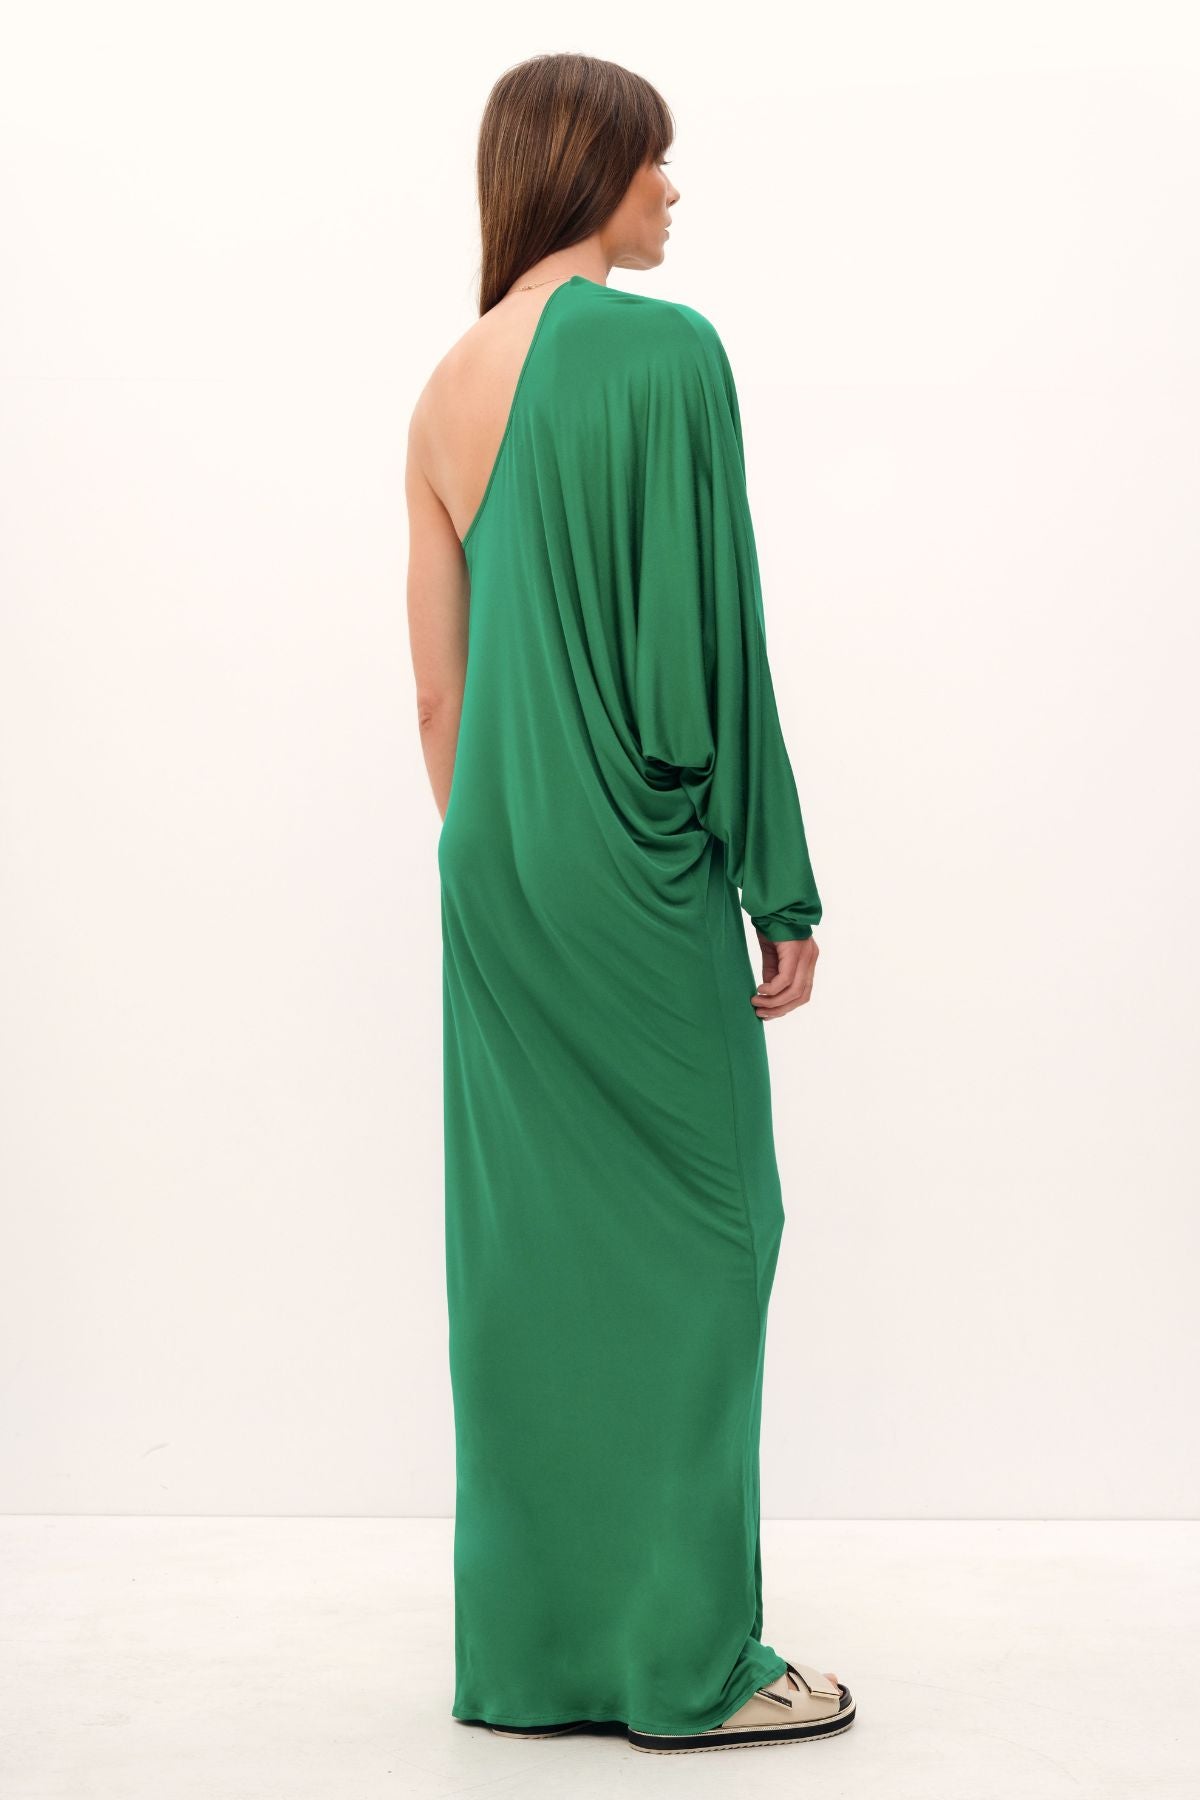 An exquisite blend of silk touch and structured silhouette, the Aphrodite One Shoulder Gown offers a flawless combination of Lilac, Grass and Coco hues. Crafted with layered fabrics for a relaxed fit, this stunning look is complete with one shoulder, batwing silhouette and a lavish drape. Elevate your style with the accompanying Ciao clutch.